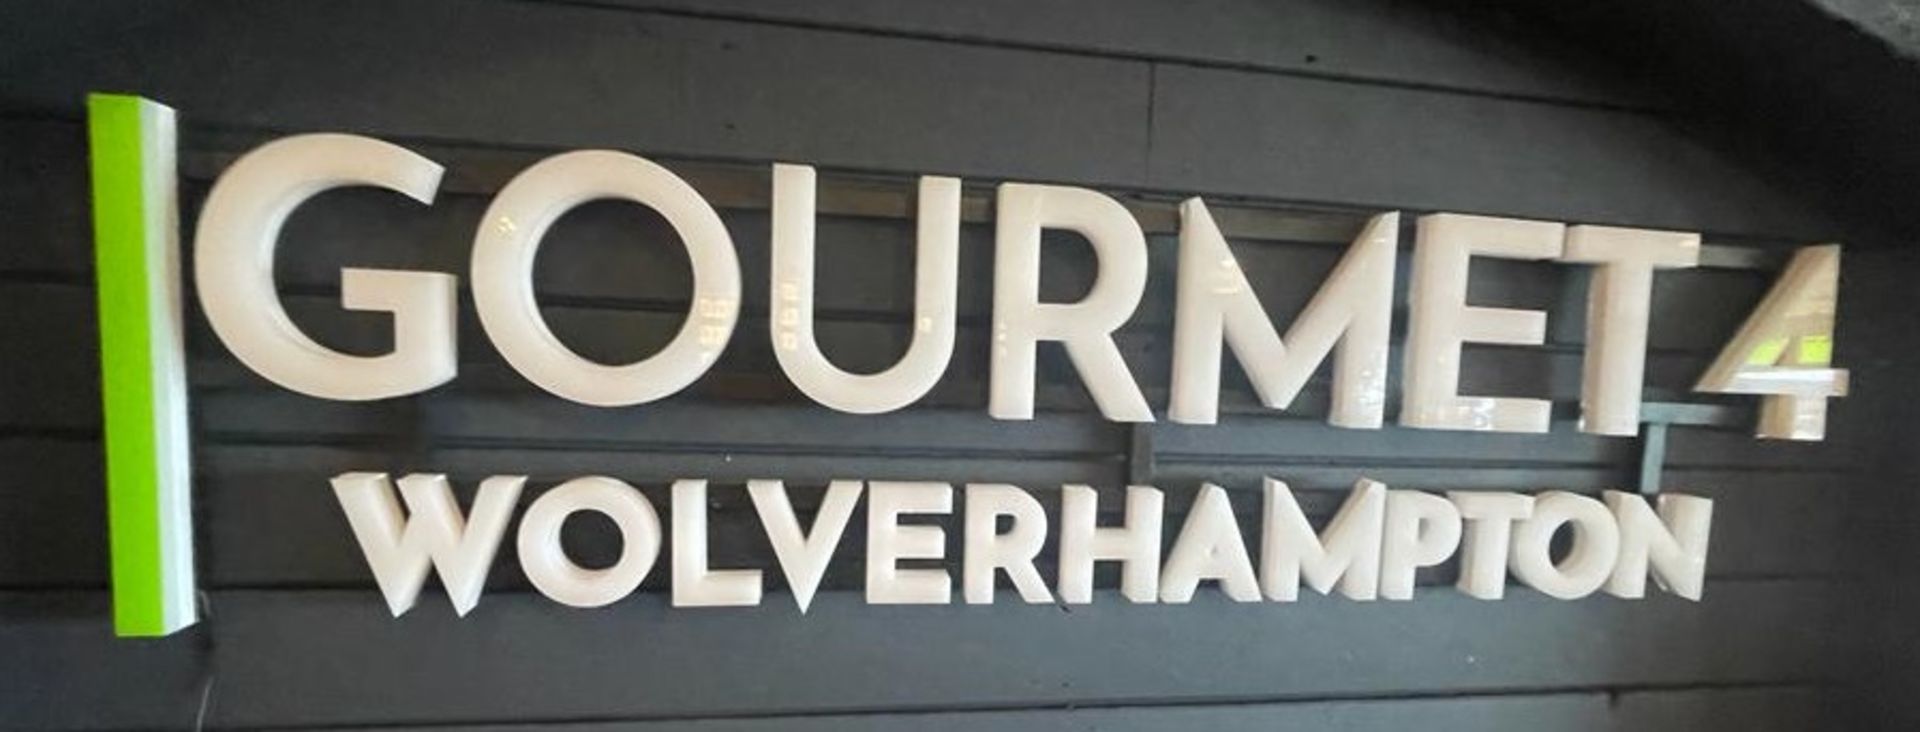 1 x Wall Mounted Illuminated Sign - Gourmet 4 Wolverhampton - Ref: 80 - CL864 - Location: - Image 6 of 7